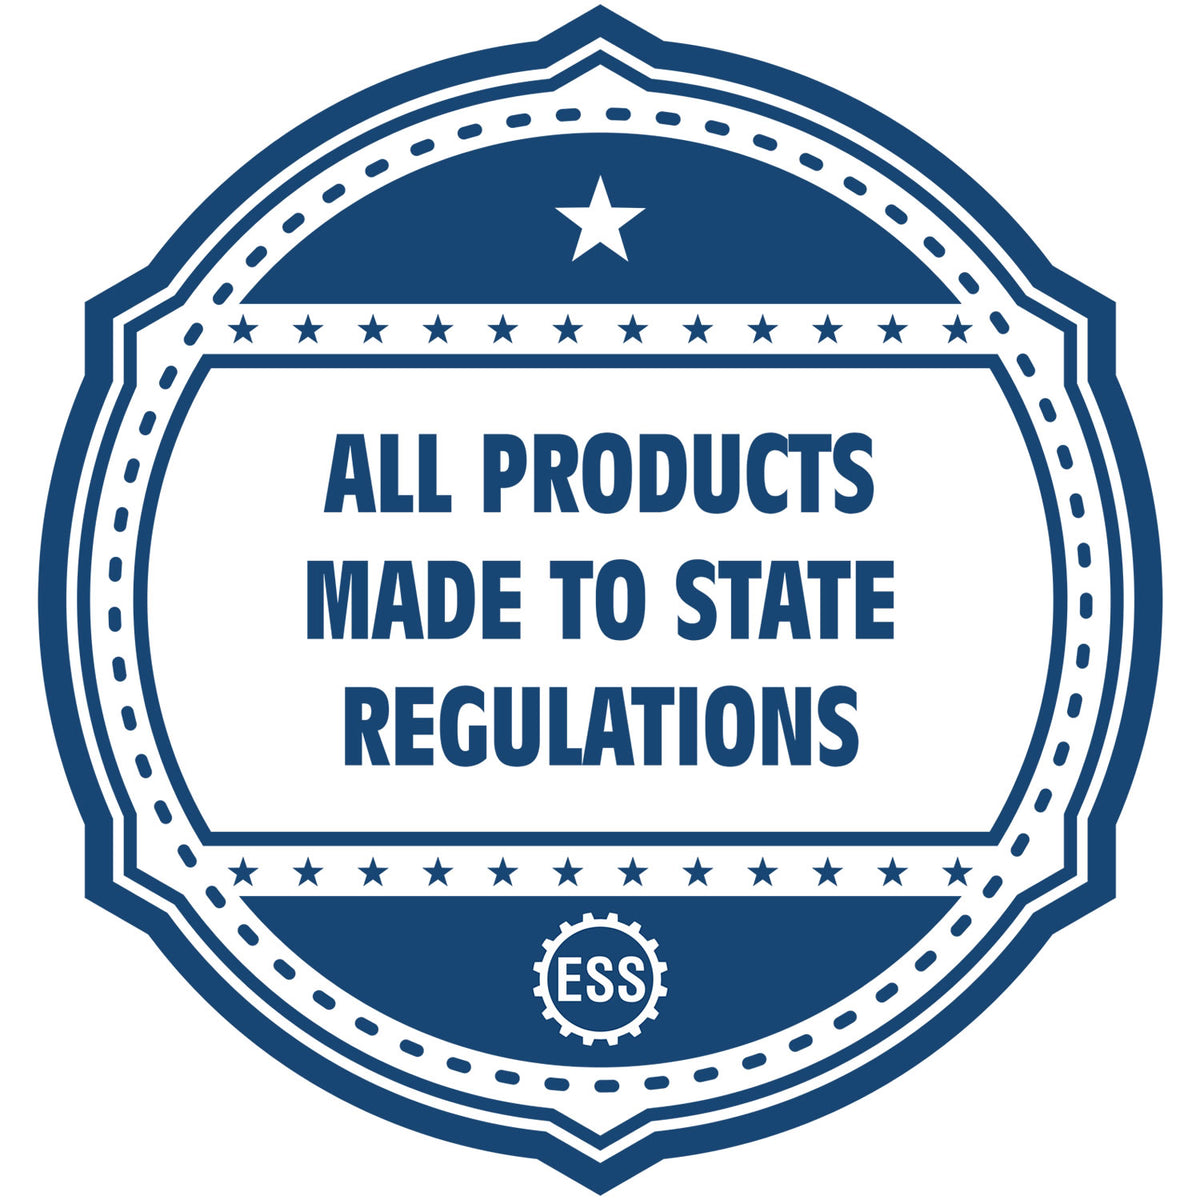 An icon or badge element for the Super Slim Arkansas Notary Public Stamp showing that this product is made in compliance with state regulations.